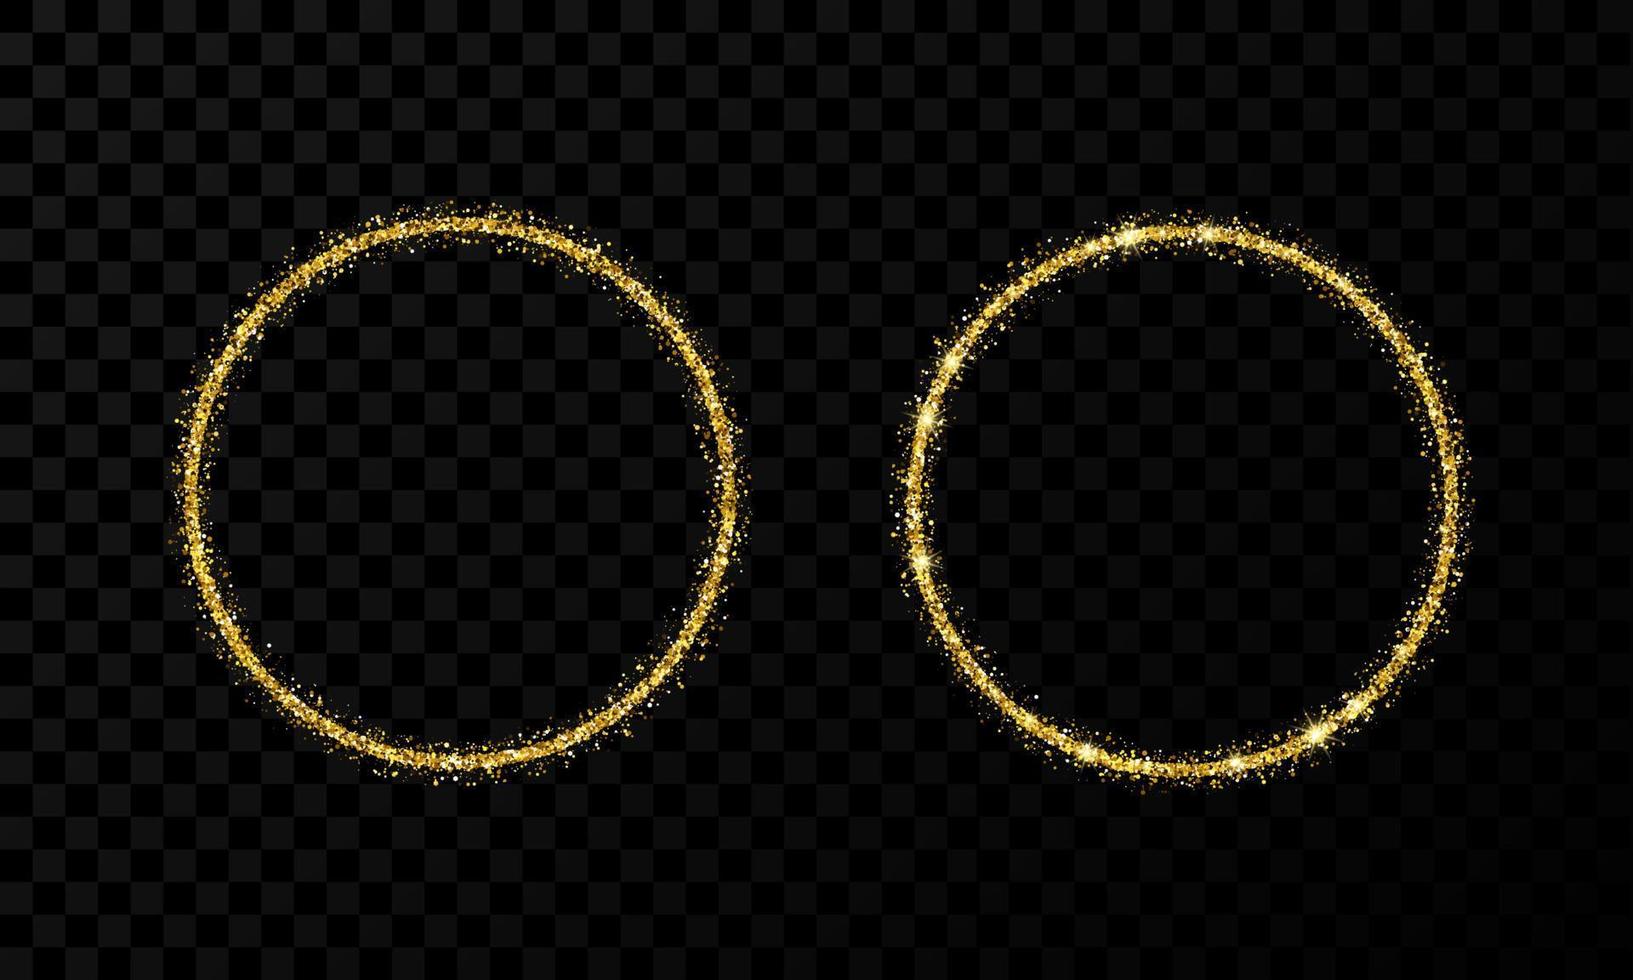 Gold circle frame. Two modern shiny frames with light effects isolated on dark background. Vector illustration.